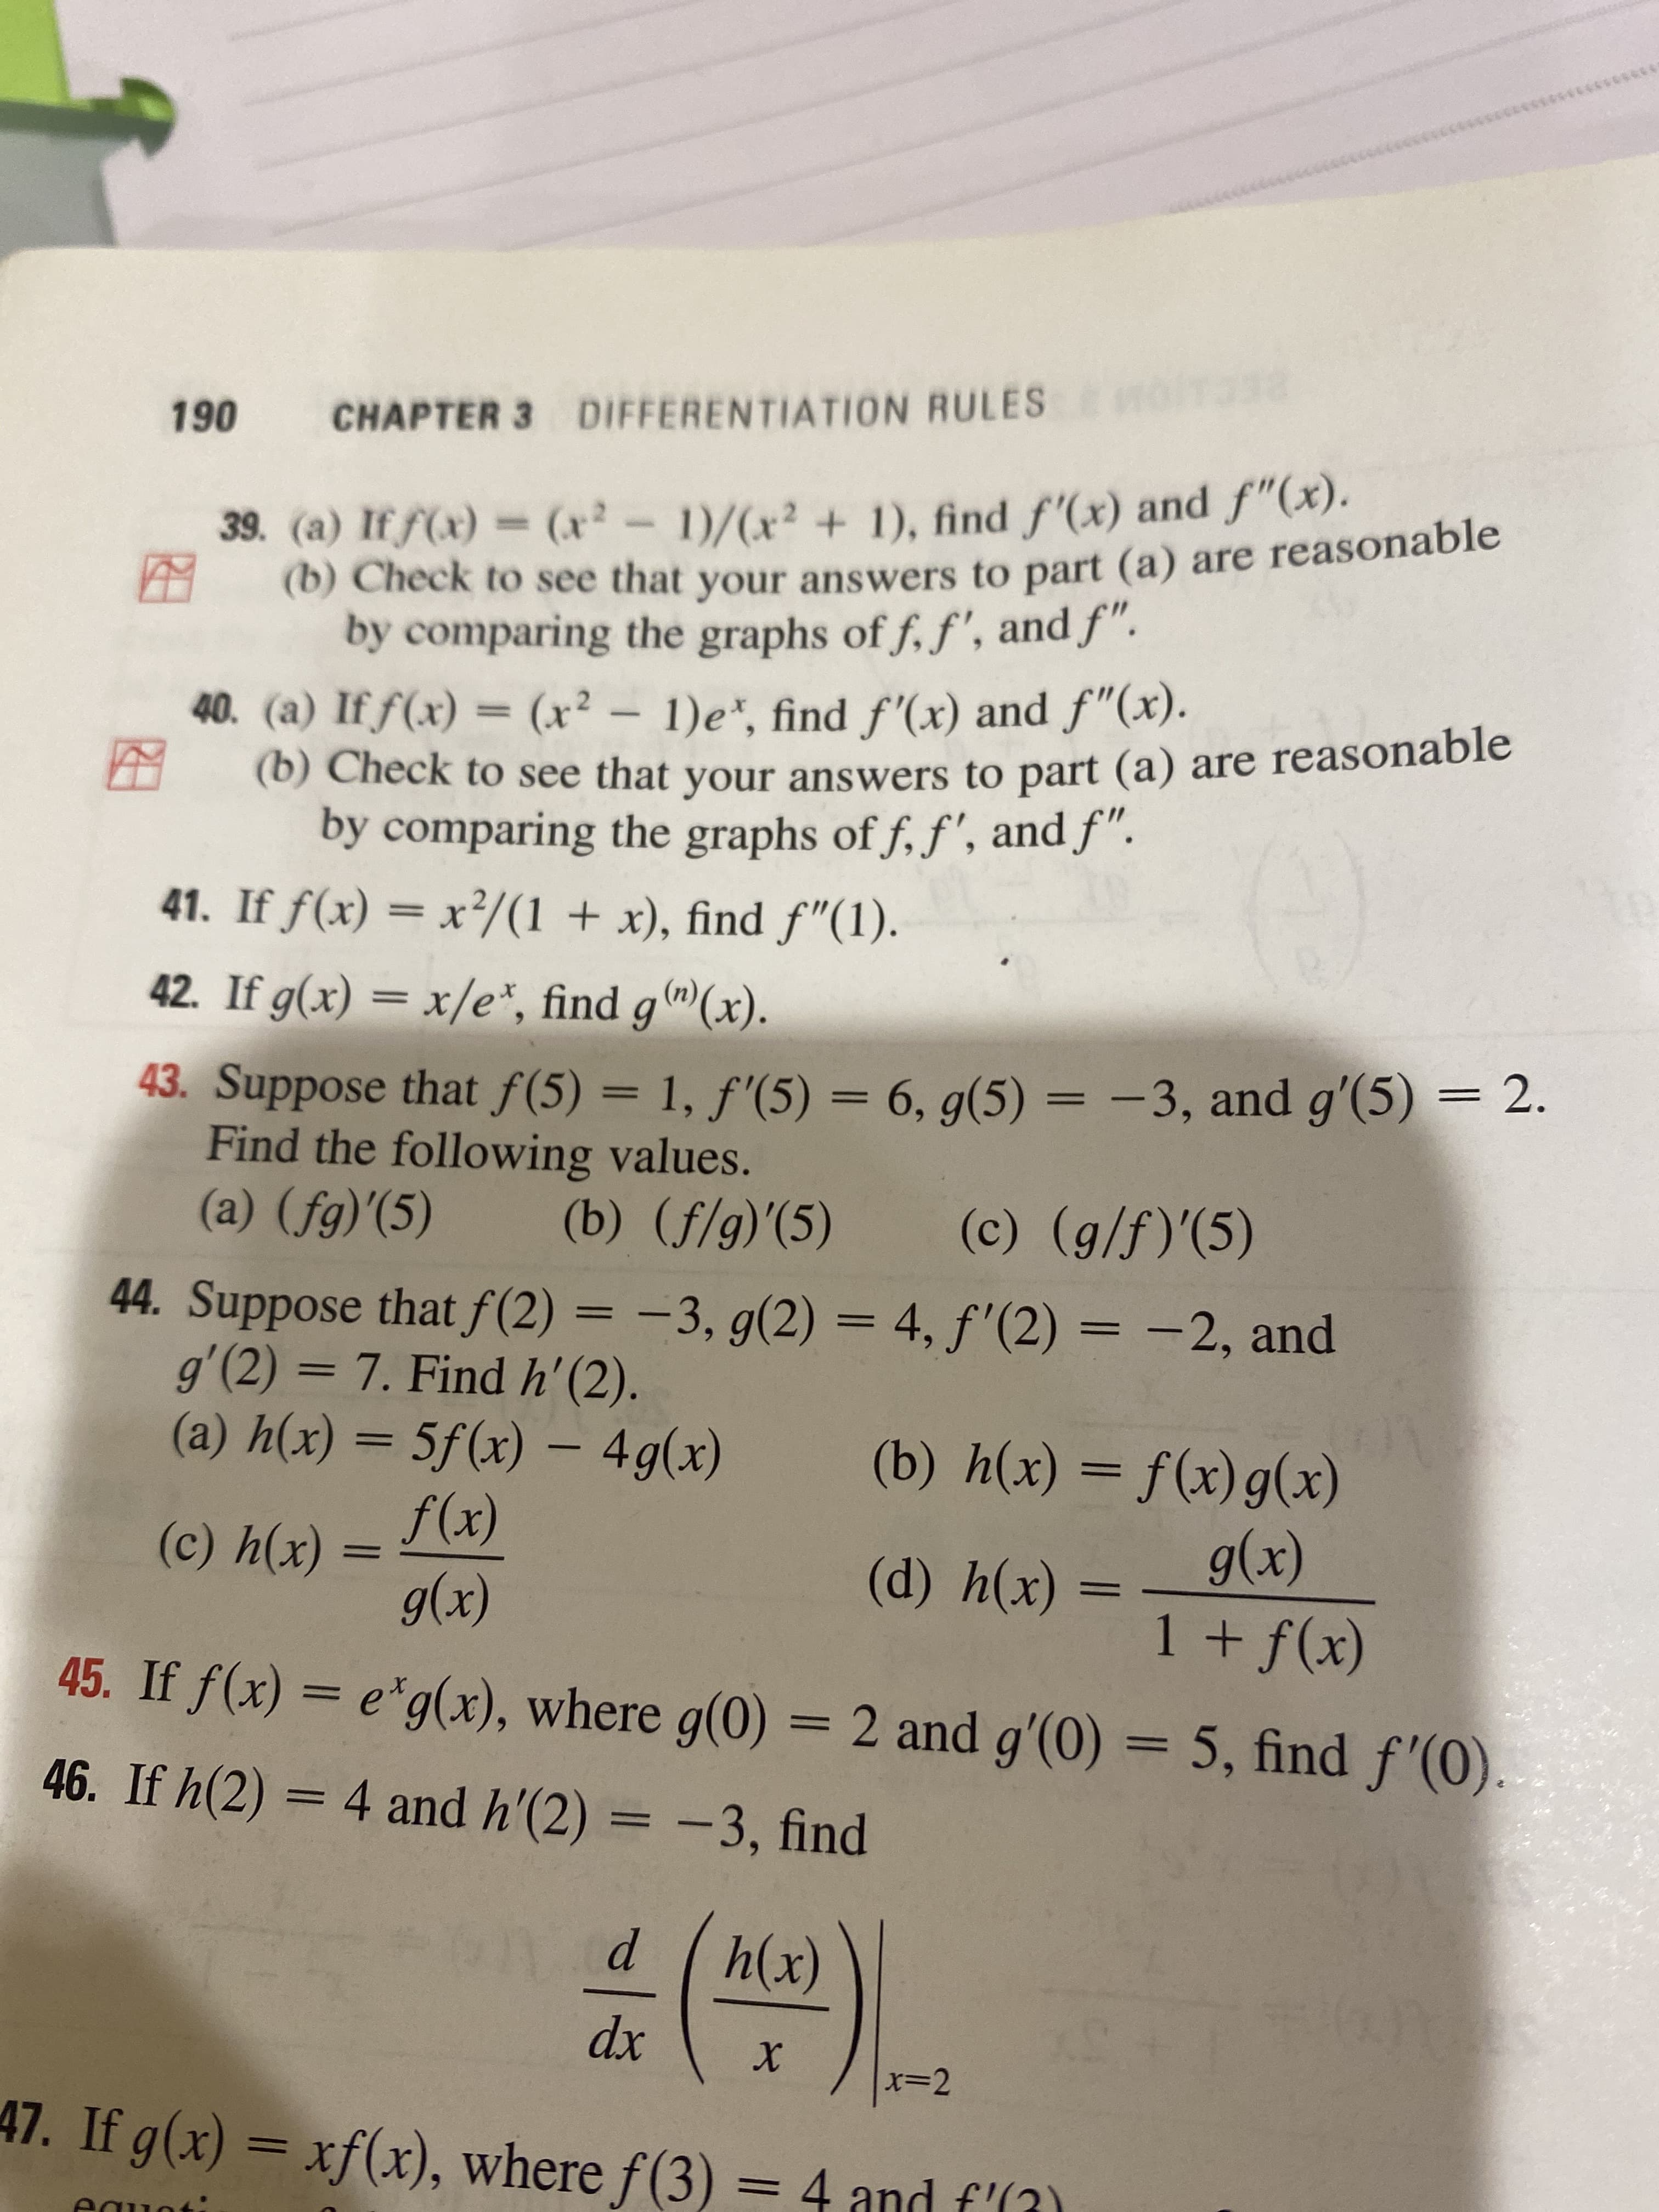 CHAPTER 3 DIFFERENTIATION RULES
061
39. (a) If f(x) = (x²-1)/(x² + 1), find f'(x) and f"(x).
(b) Check to see that your answers to part (a) are reasonable
by comparing the graphs of f, f', and f".
40. (a) If f(x) = (x² - 1)e*, find f'(x) and f"(x).
(b) Check to see that your answers to part (a) are reasonable
by comparing the graphs of f, f', and f".
41. If f(x) = x/(1 + x), find f"(1).
42. If g(x) = x/e*, find g®(x).
43. Suppose that f(5) = 1, f'(5) = 6, g(5) = -3, and g'(5) = 2.
Find the following values.
%3D
%3D
%3|
(() ()
44. Suppose that f(2) = -3, g(2) = 4, f'(2) = -2, and
g'(2) = 7. Find h'(2).
(x)4 (в)
(a) h(x) = 5f(x) –- 4g(x)
I|
(x)6 - (x)fS
(b) h(x) = f(x)g(x)
(x)
(x)
(x)6
(x)f + I
||
(*)ч ()
45. If f(x) = e*g(x), where g(0) = 2 and g'(0) = 5, find f'(0).
46. If h(2) = 4 and h'(2) = -3, find
%3D
(x)
xp
x=D2
47. If g(x) = xf(x), where f(3) =4 and f'(3)
